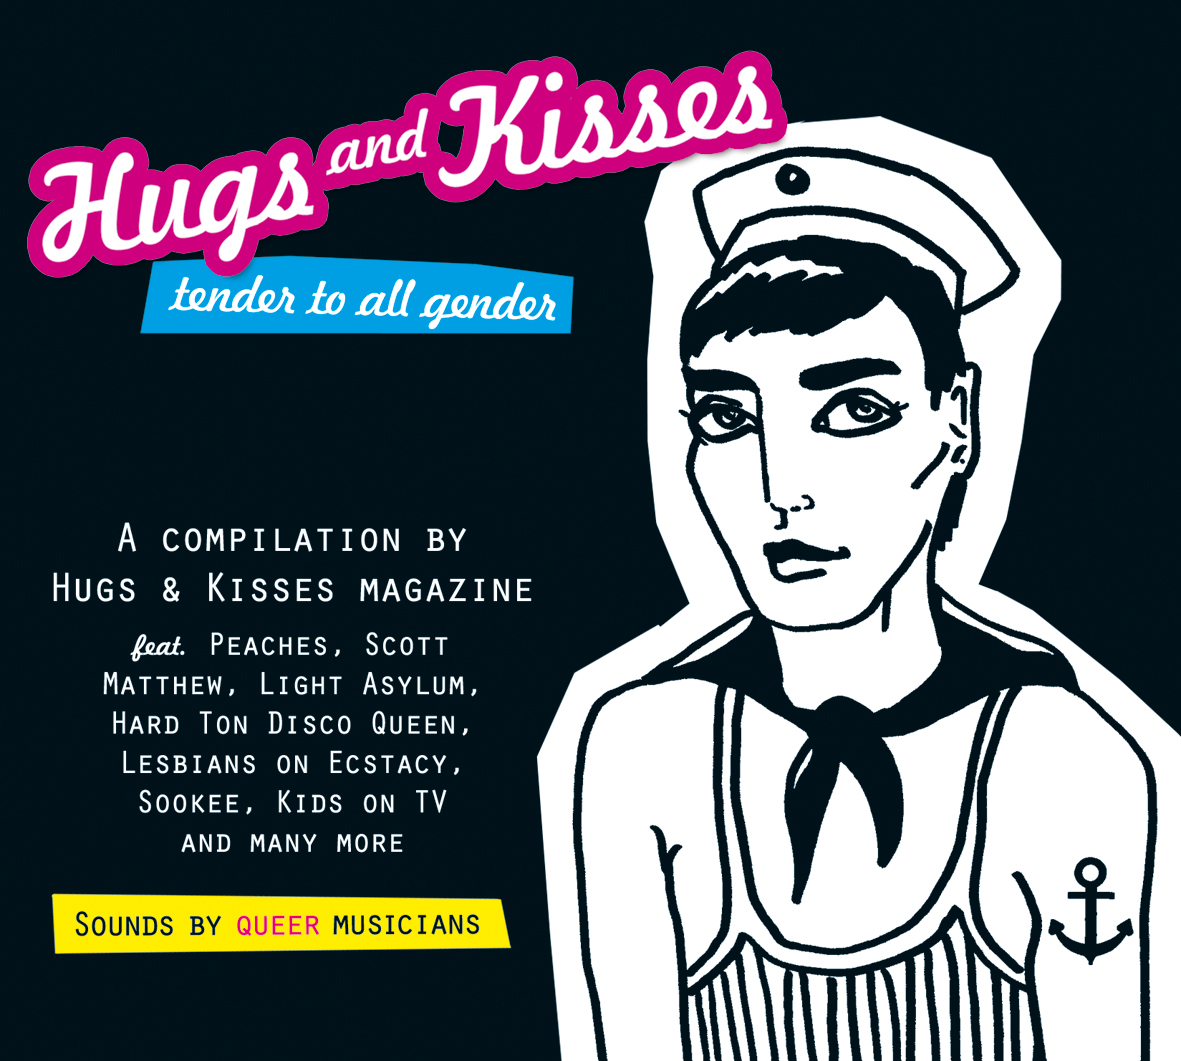 Hugs And Kisses - tender to all gender 4